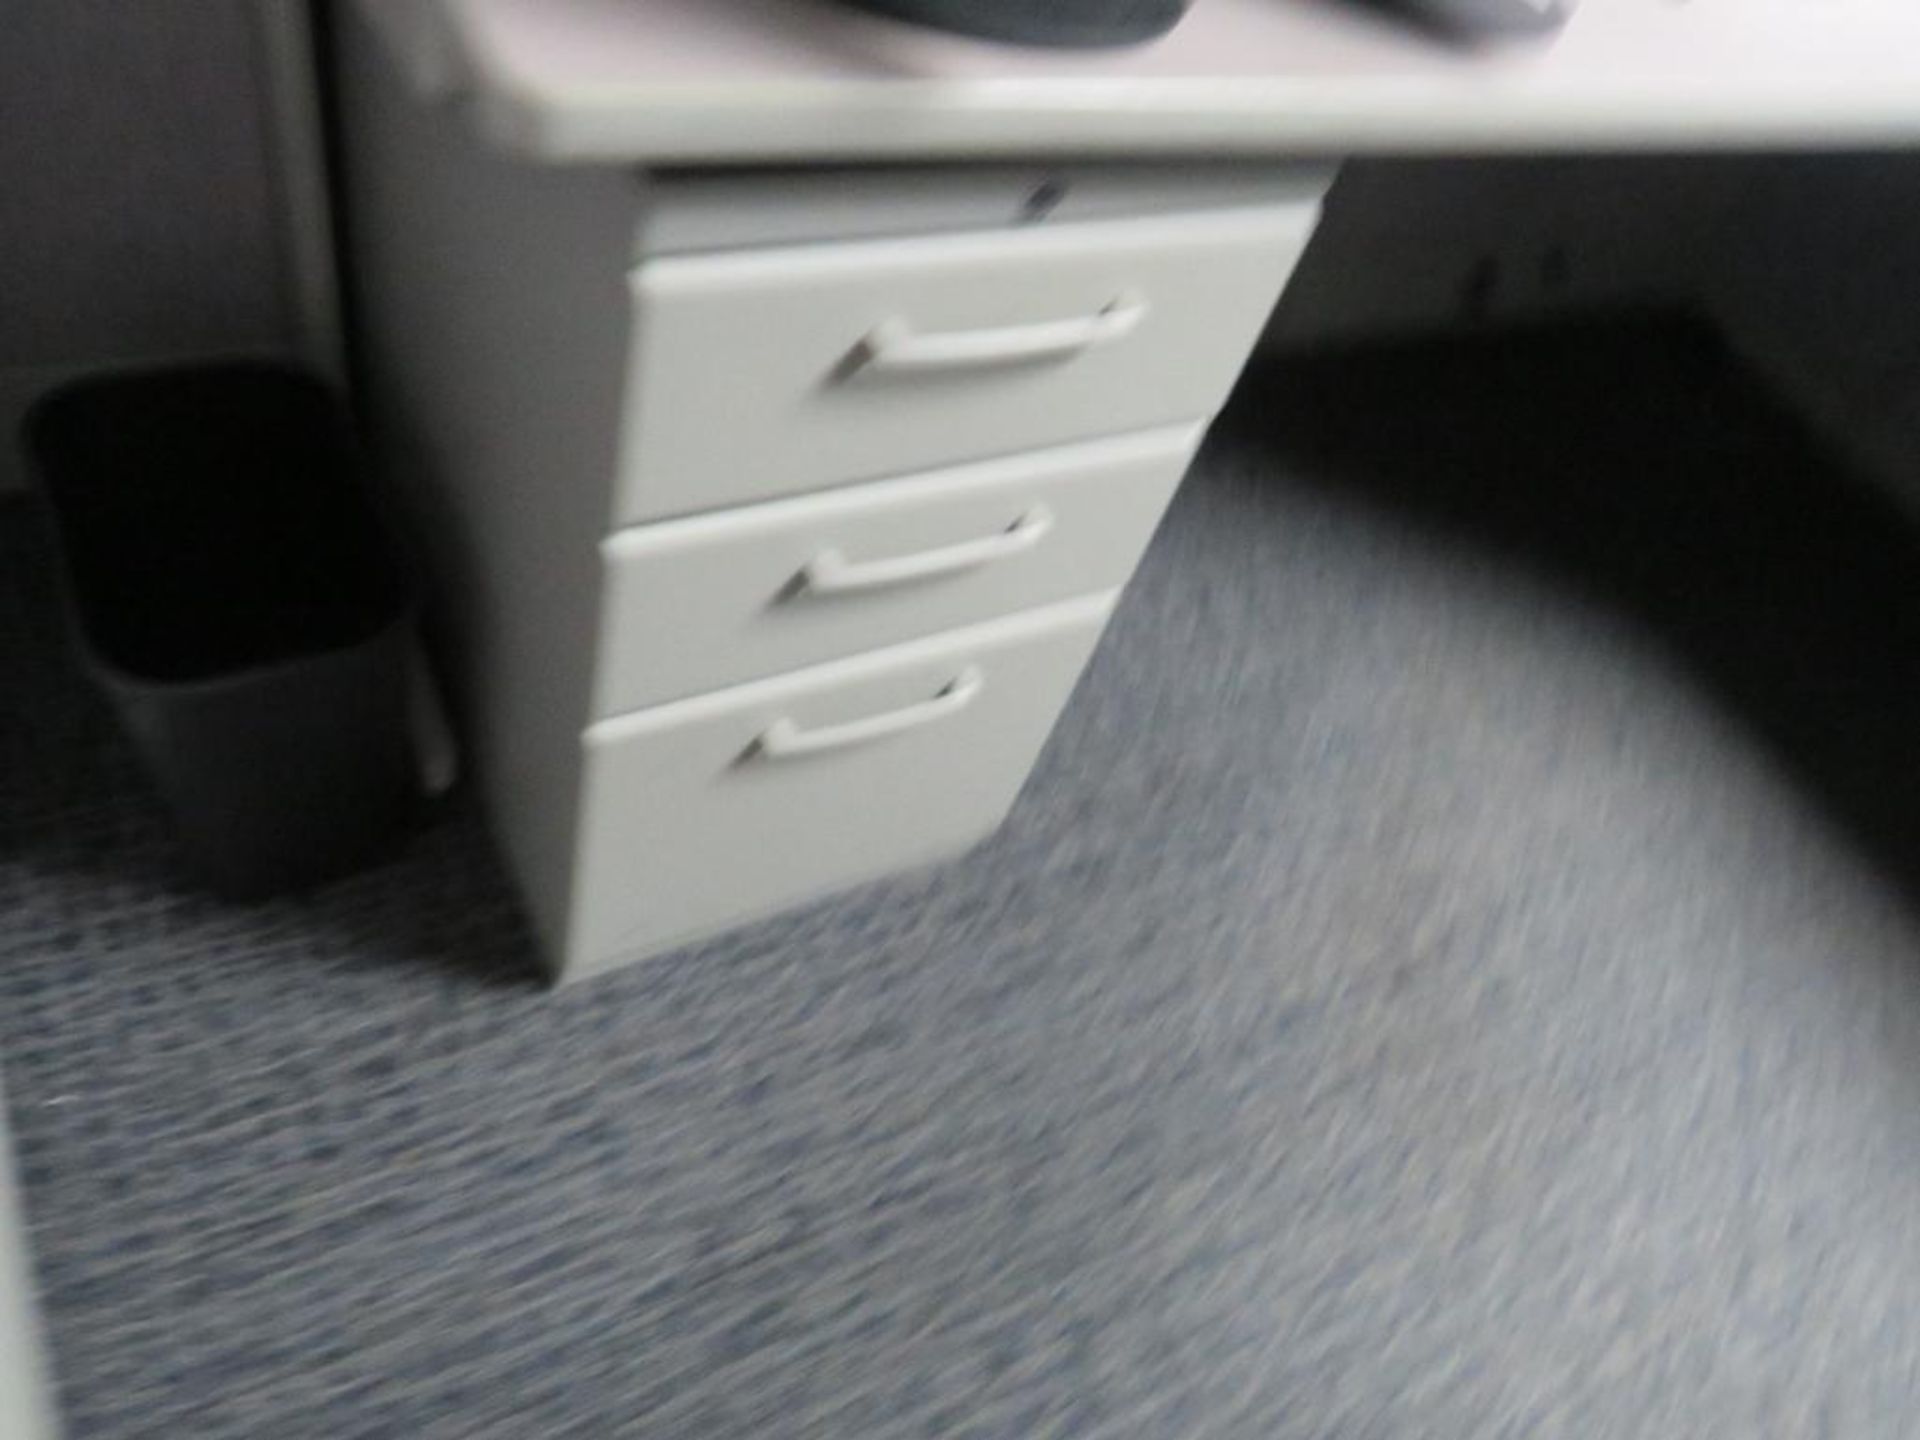 Lot c/o: Large Quantity of Assorted Under Desk File Cabinets - Image 4 of 7